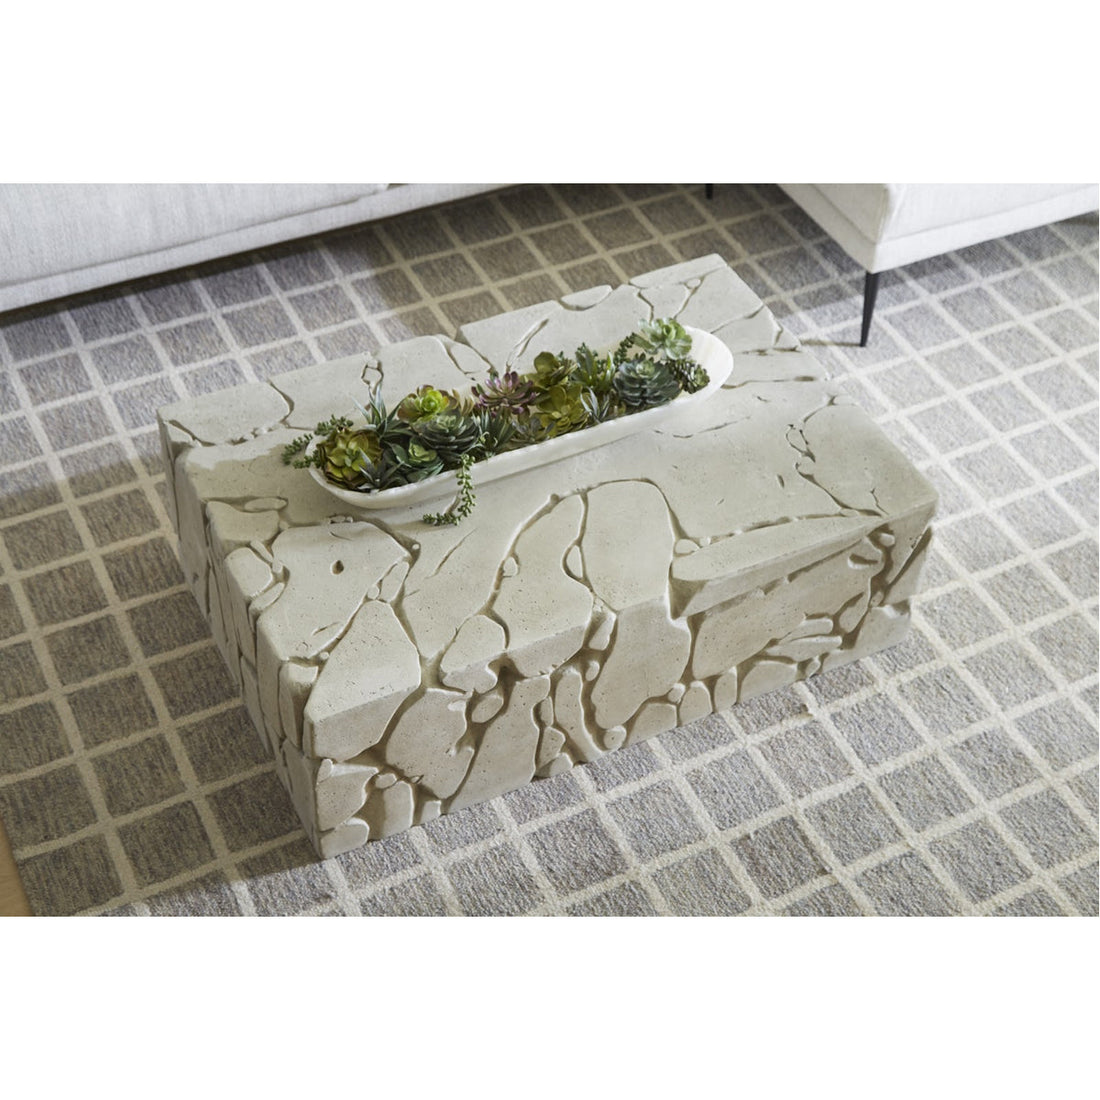 Phillips Collection Chunk Outdoor Coffee Table